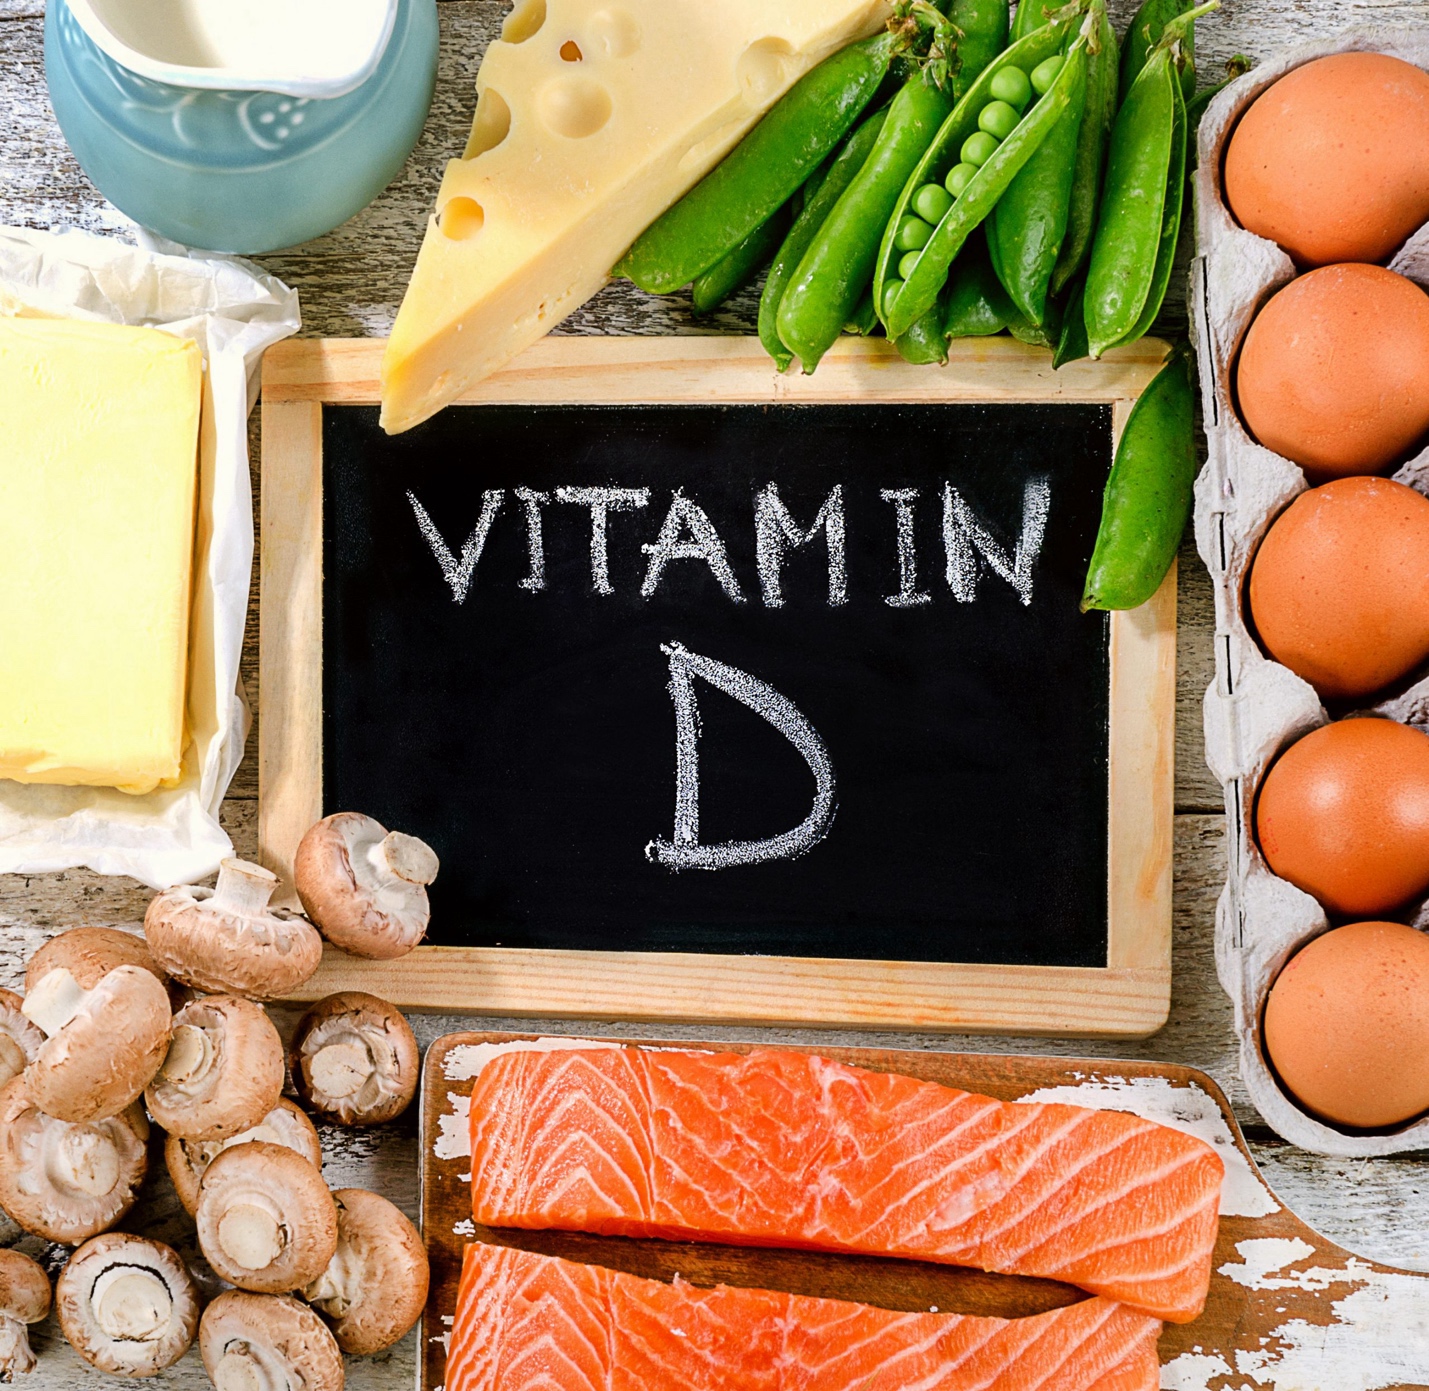 Picture with food that is rich in Vitamin D